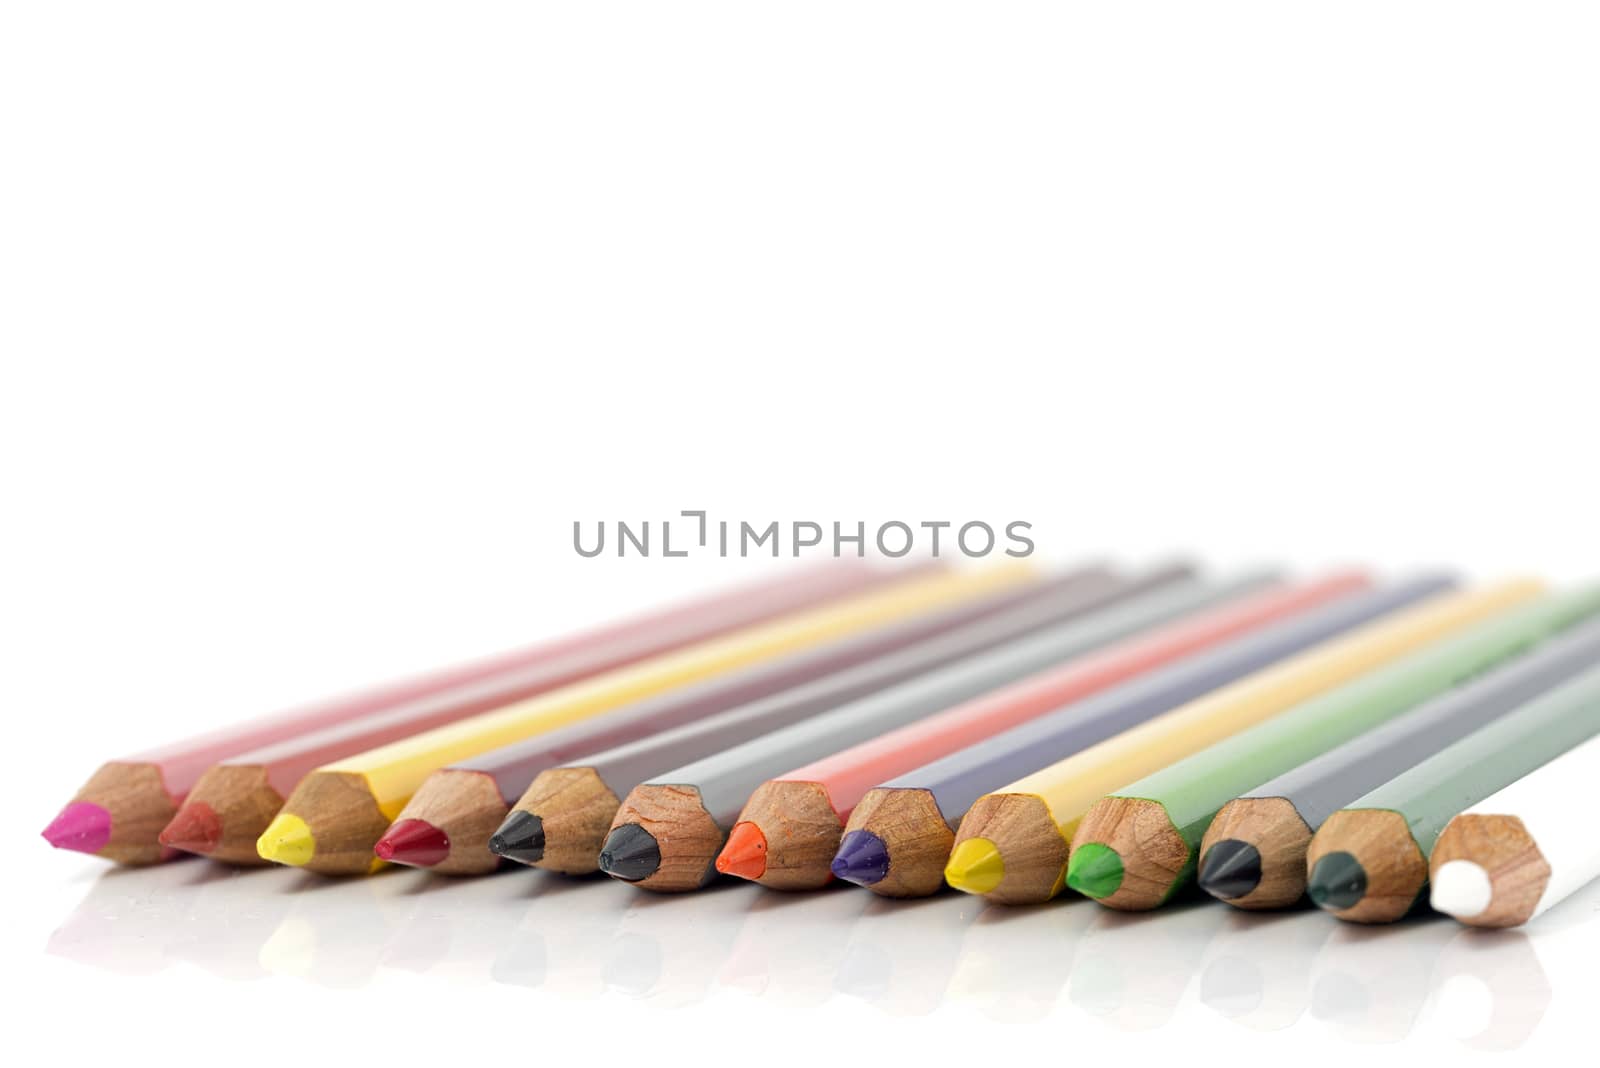 pensils in red green blue yellow white and others isolated on background with text space